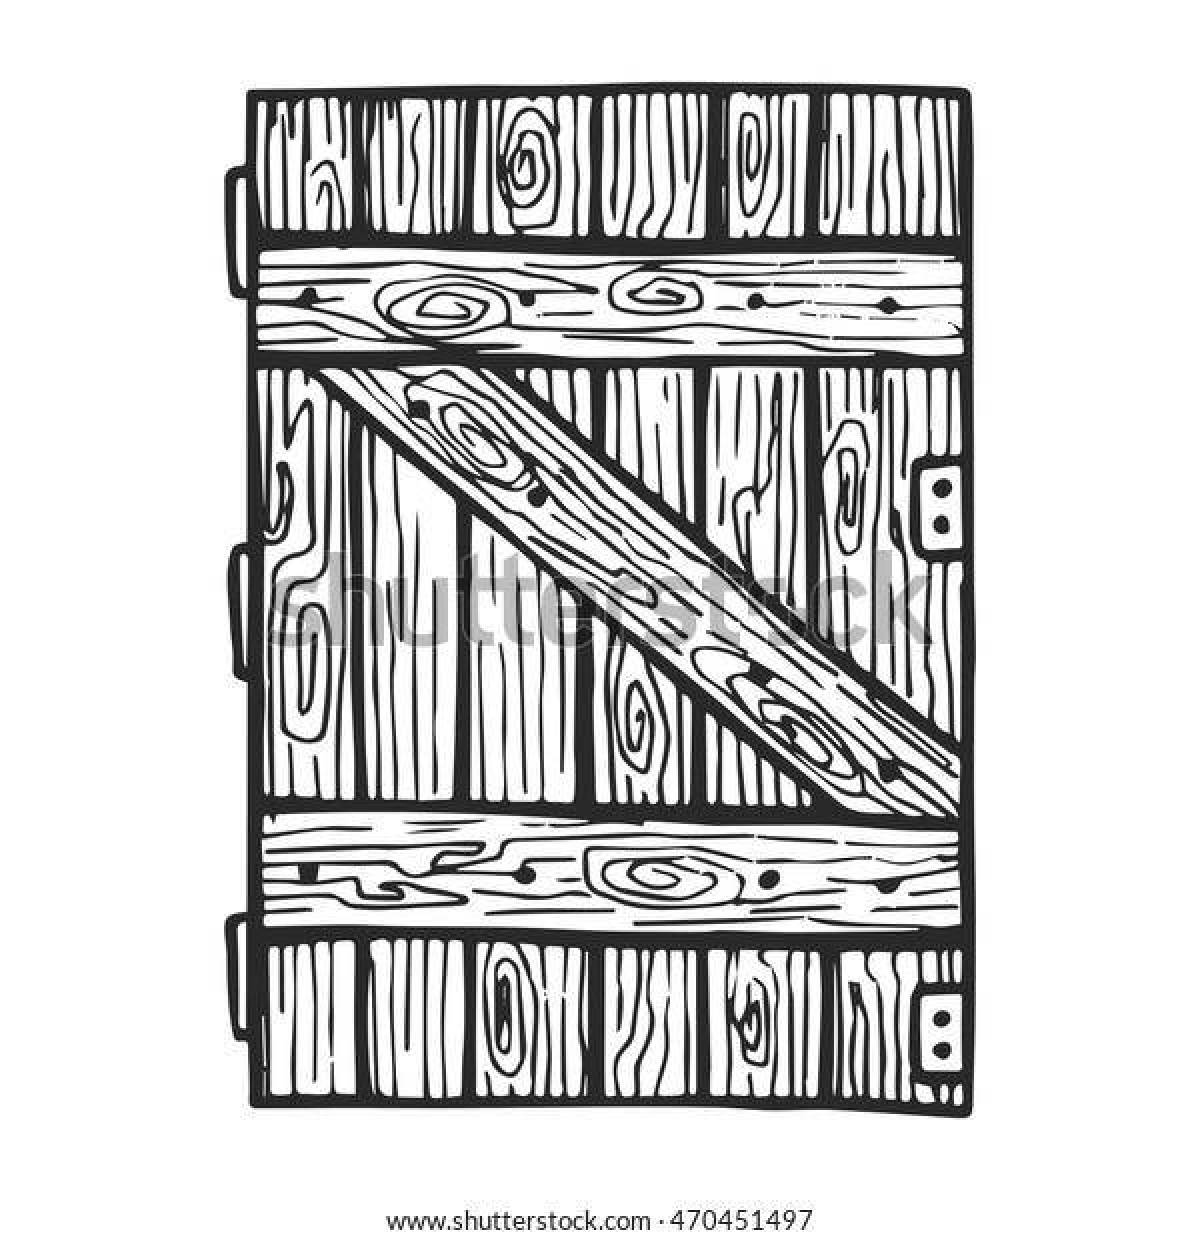 Great wooden coloring book